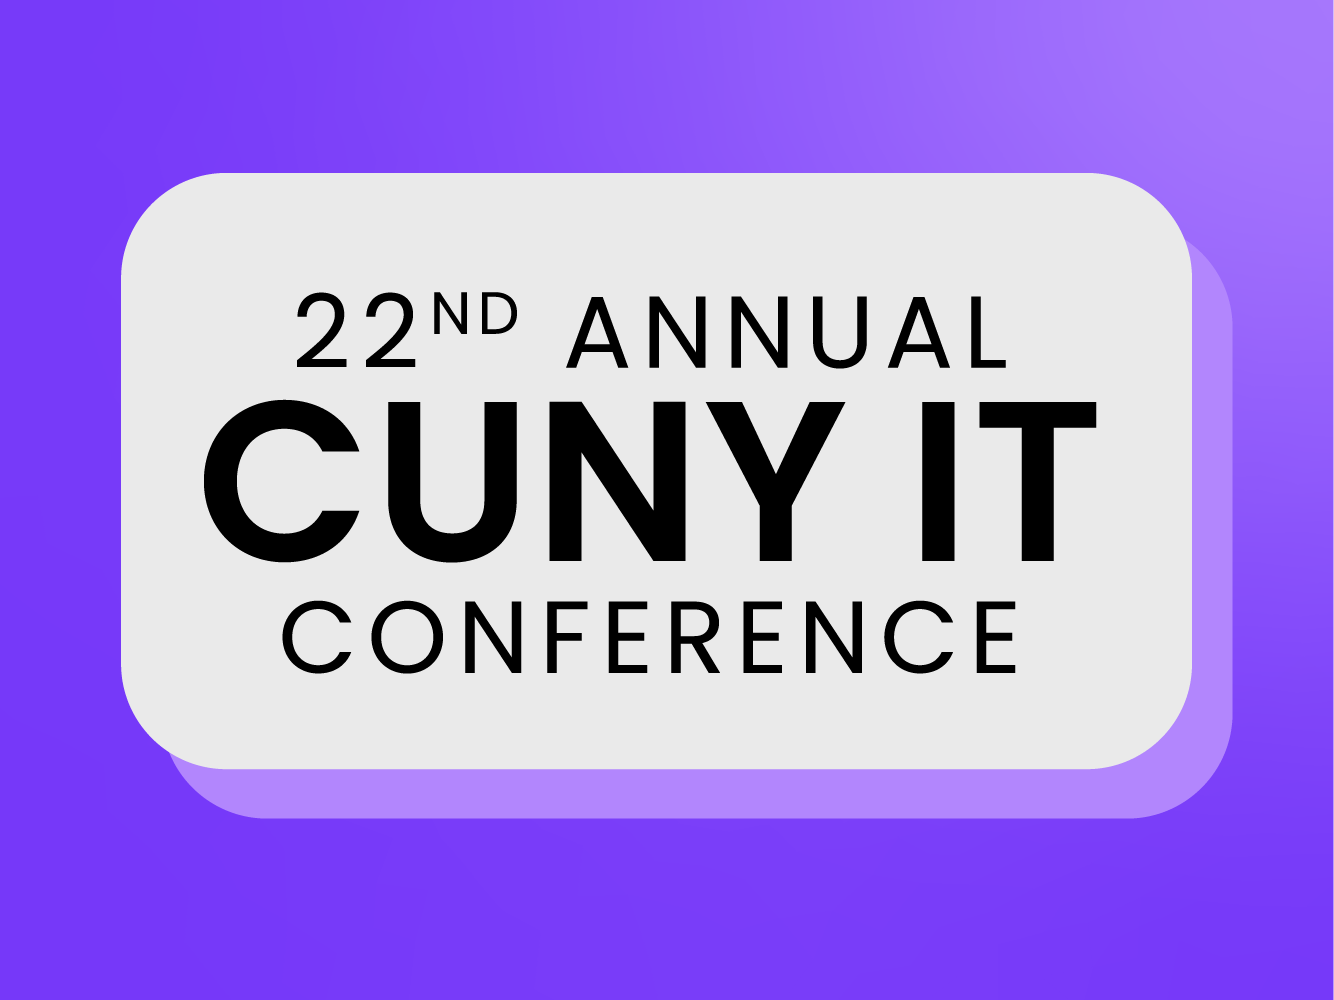 ProcessMaker is participating in the 22nd Annual CUNY IT Conference